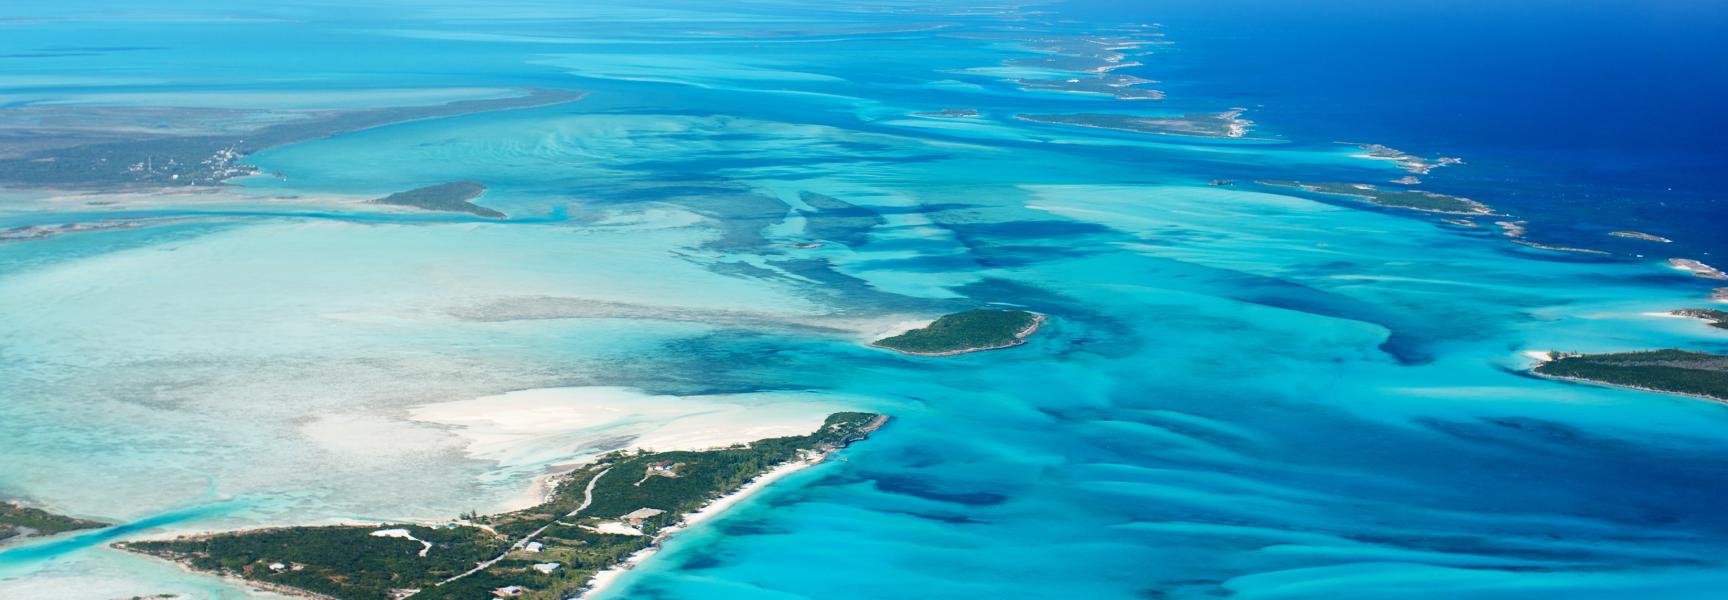 View of Bahamas islands from above